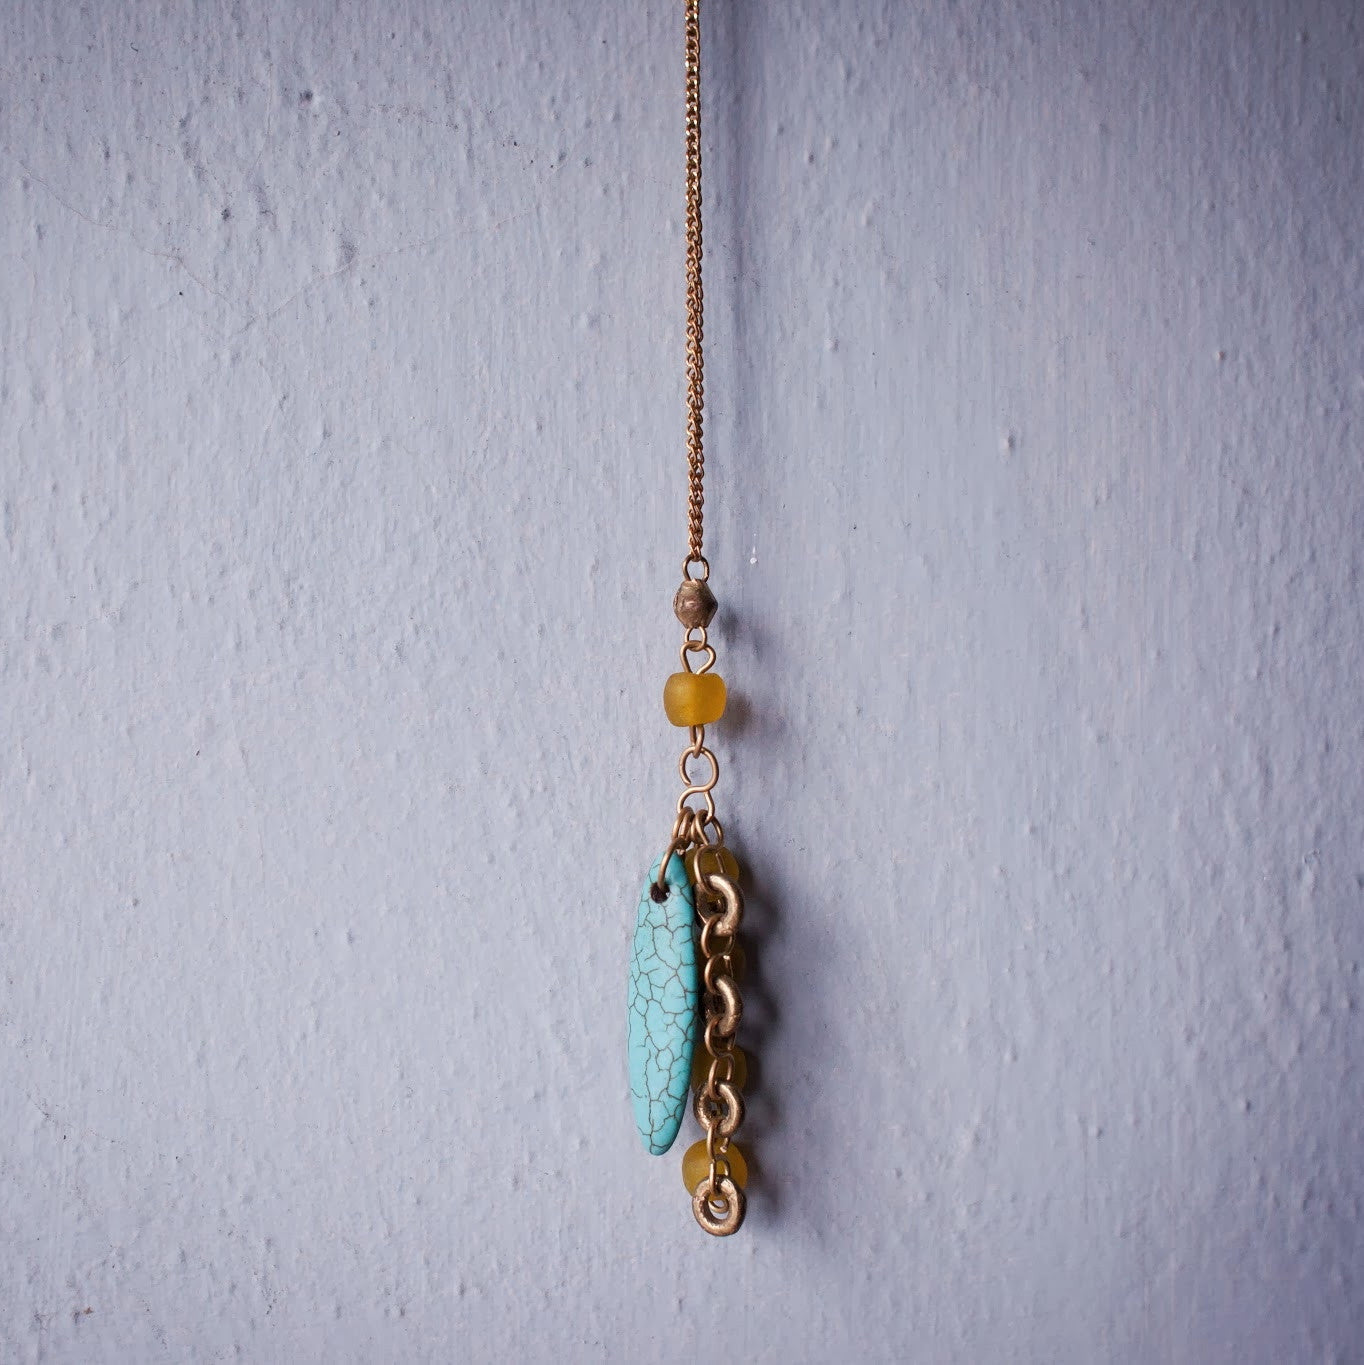 Turquoise Pendant Necklace - Kenyan materials and design for a fair trade boutique